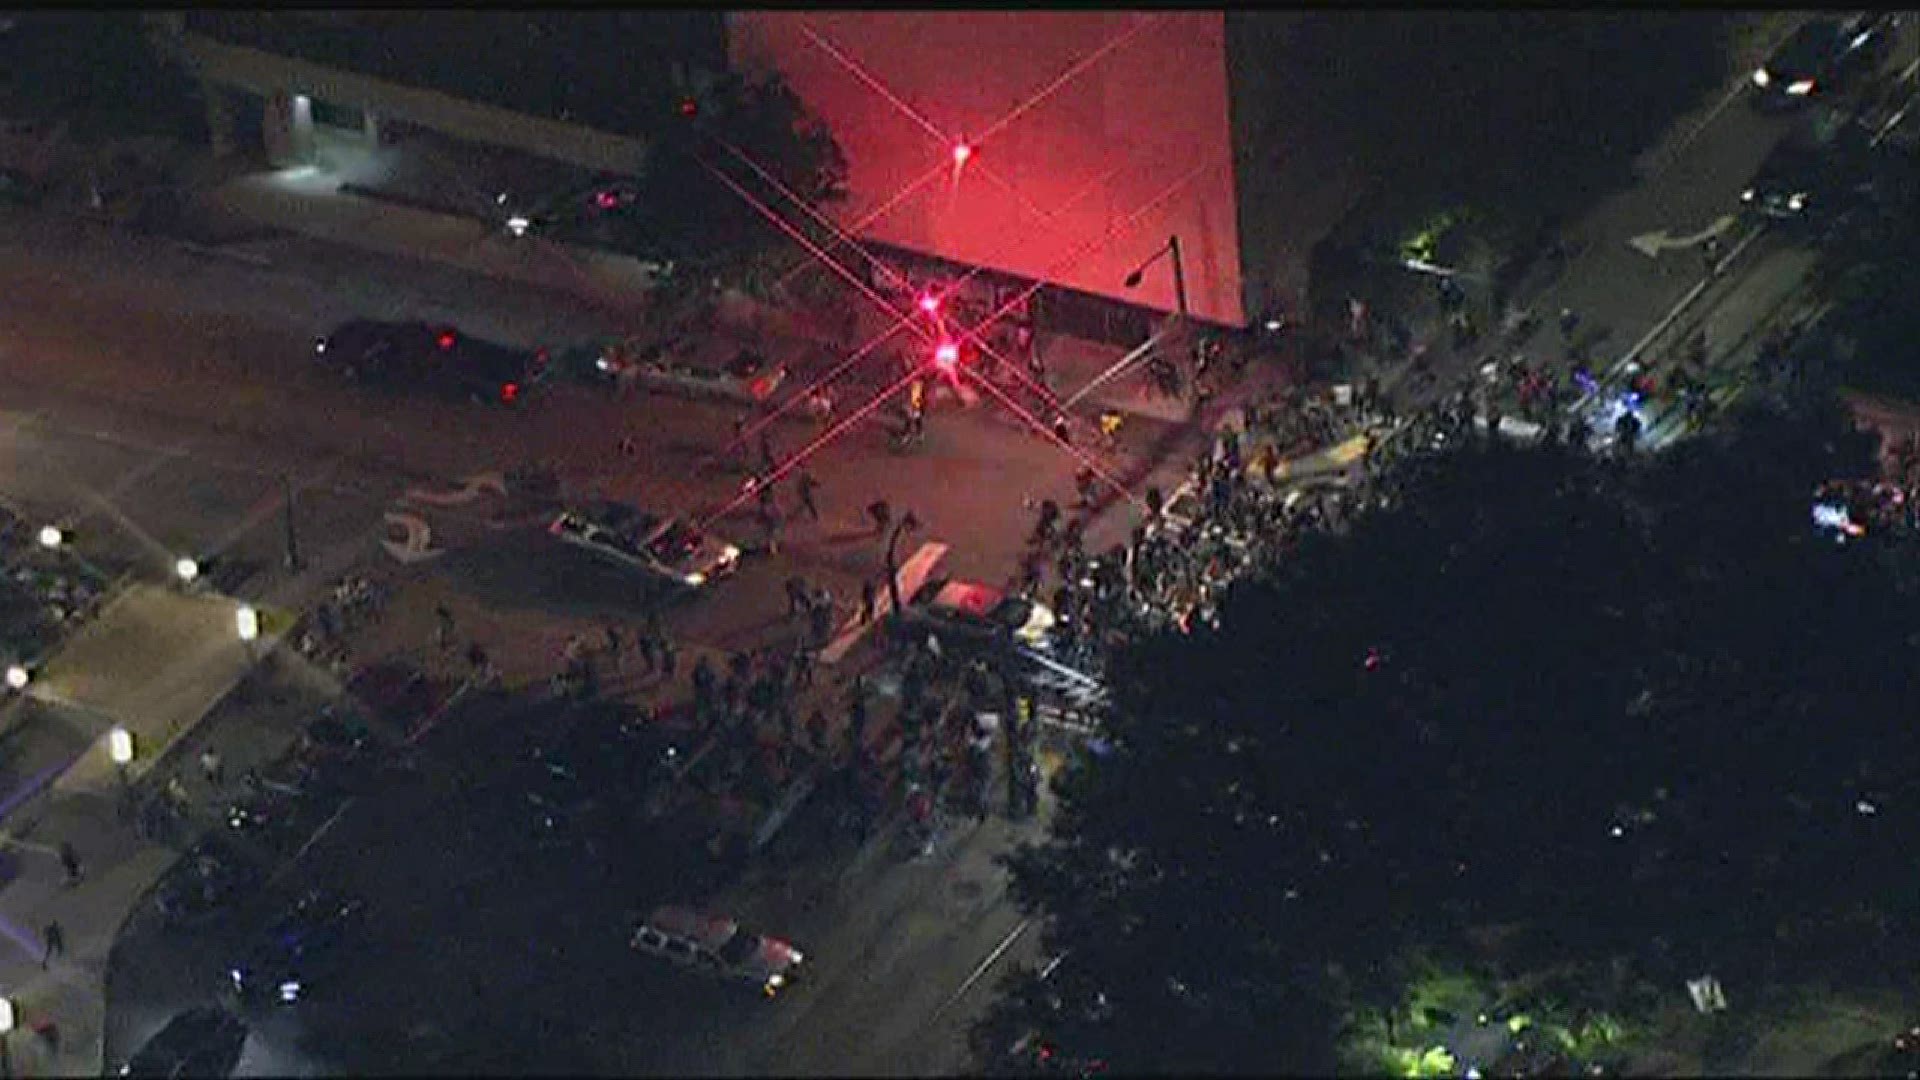 Video from 11Alive Skytracker11 shows protesters using fireworks as projectiles.